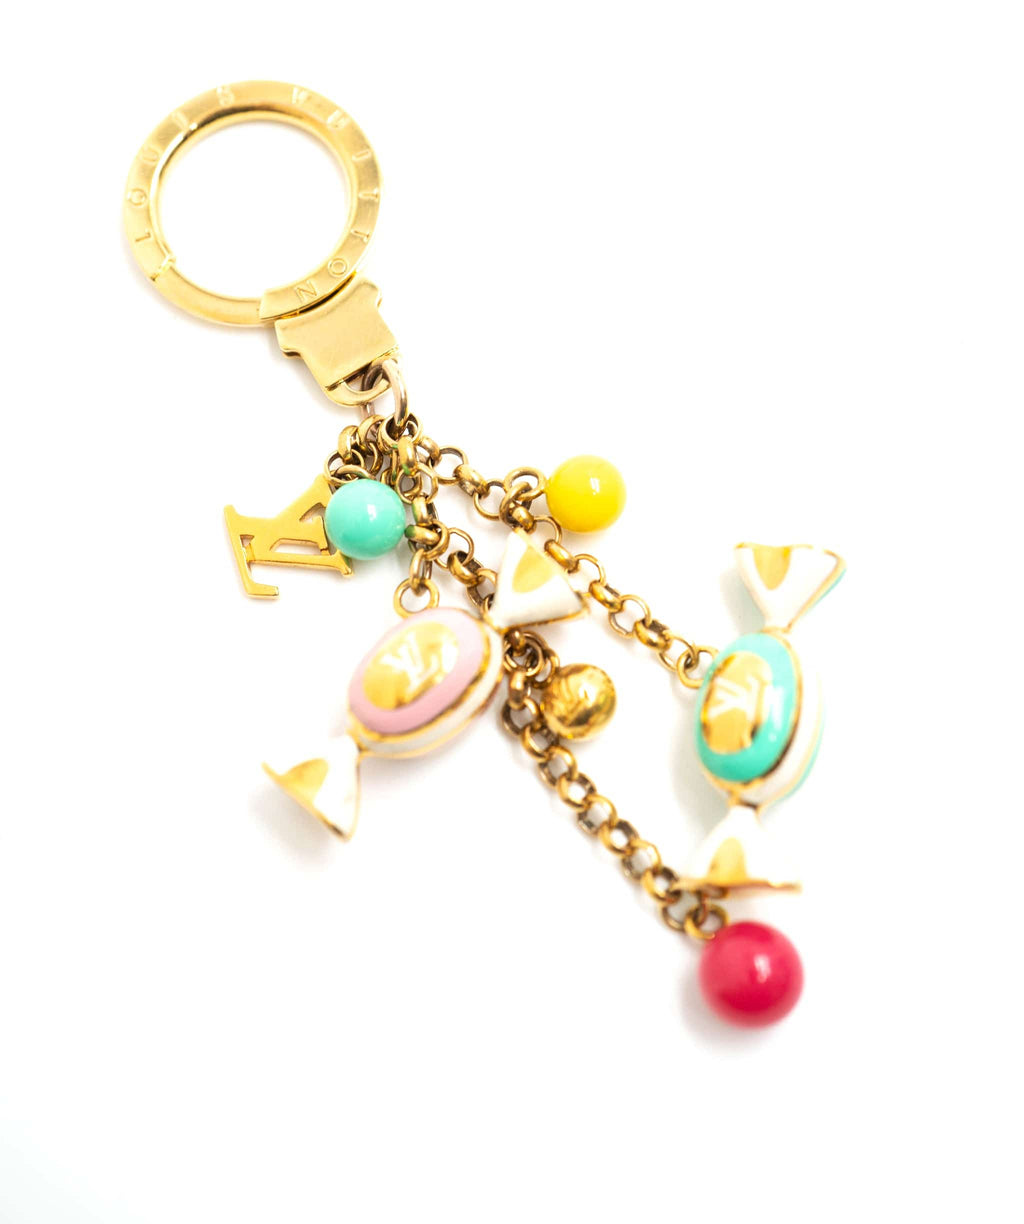 Louis Vuitton Delice Candy Bag Charm - Gold Keychains, Accessories -  LOU775226